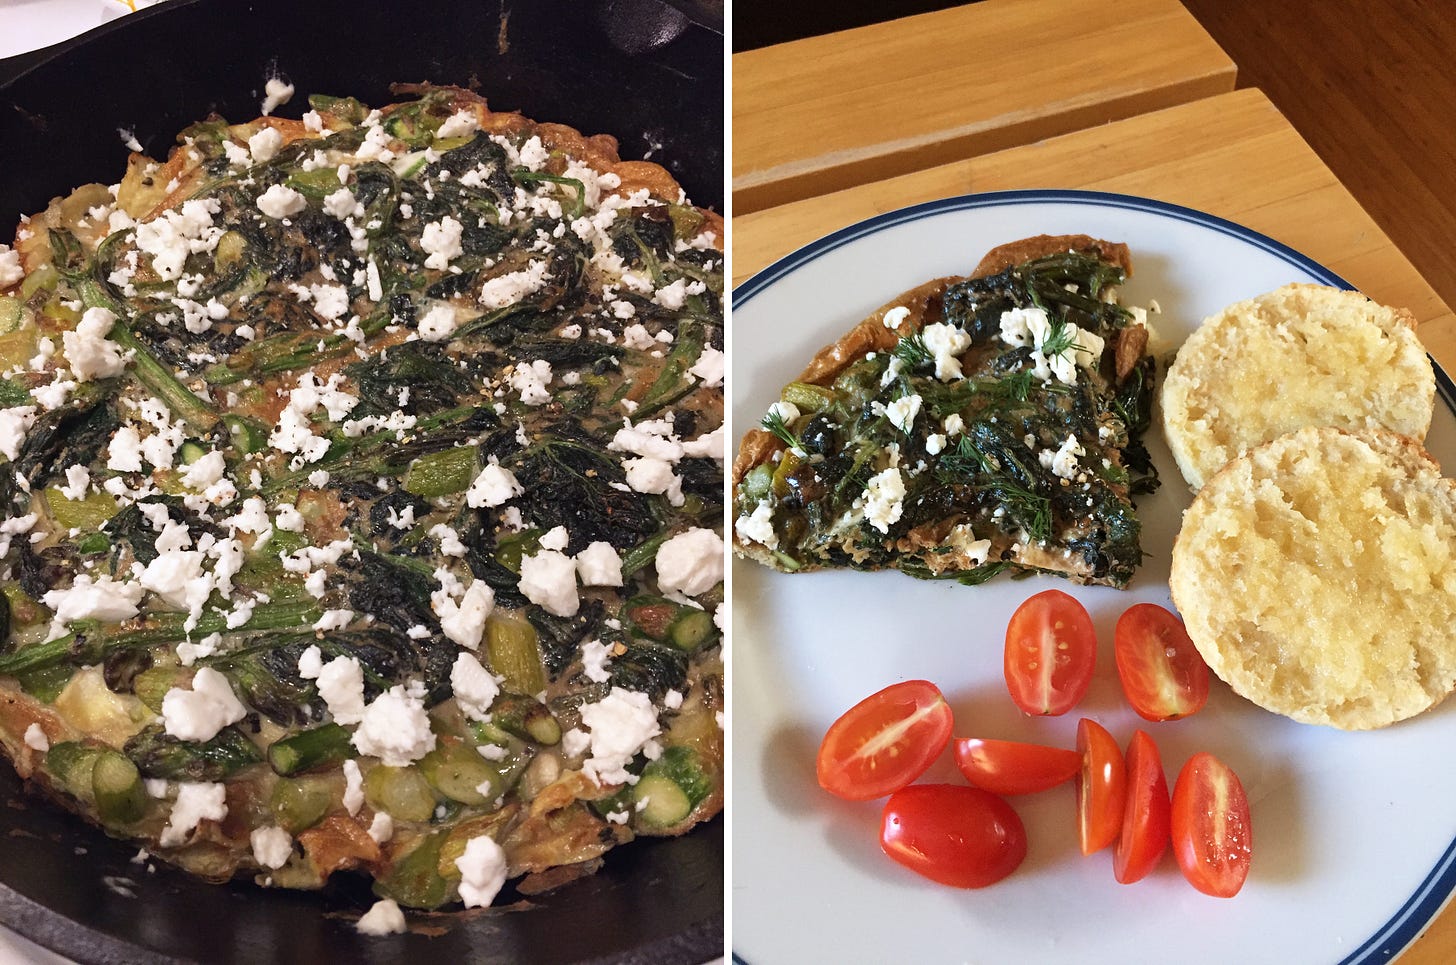 Left image: a cast-iron pan of frittata with dark green nettles and slices of asparagus visible under crumbles of feta. Right image: a triangular slice of the frittata sits on a white plate with a buttered biscuit to its right, and a mess of sliced grape tomatoes below it.